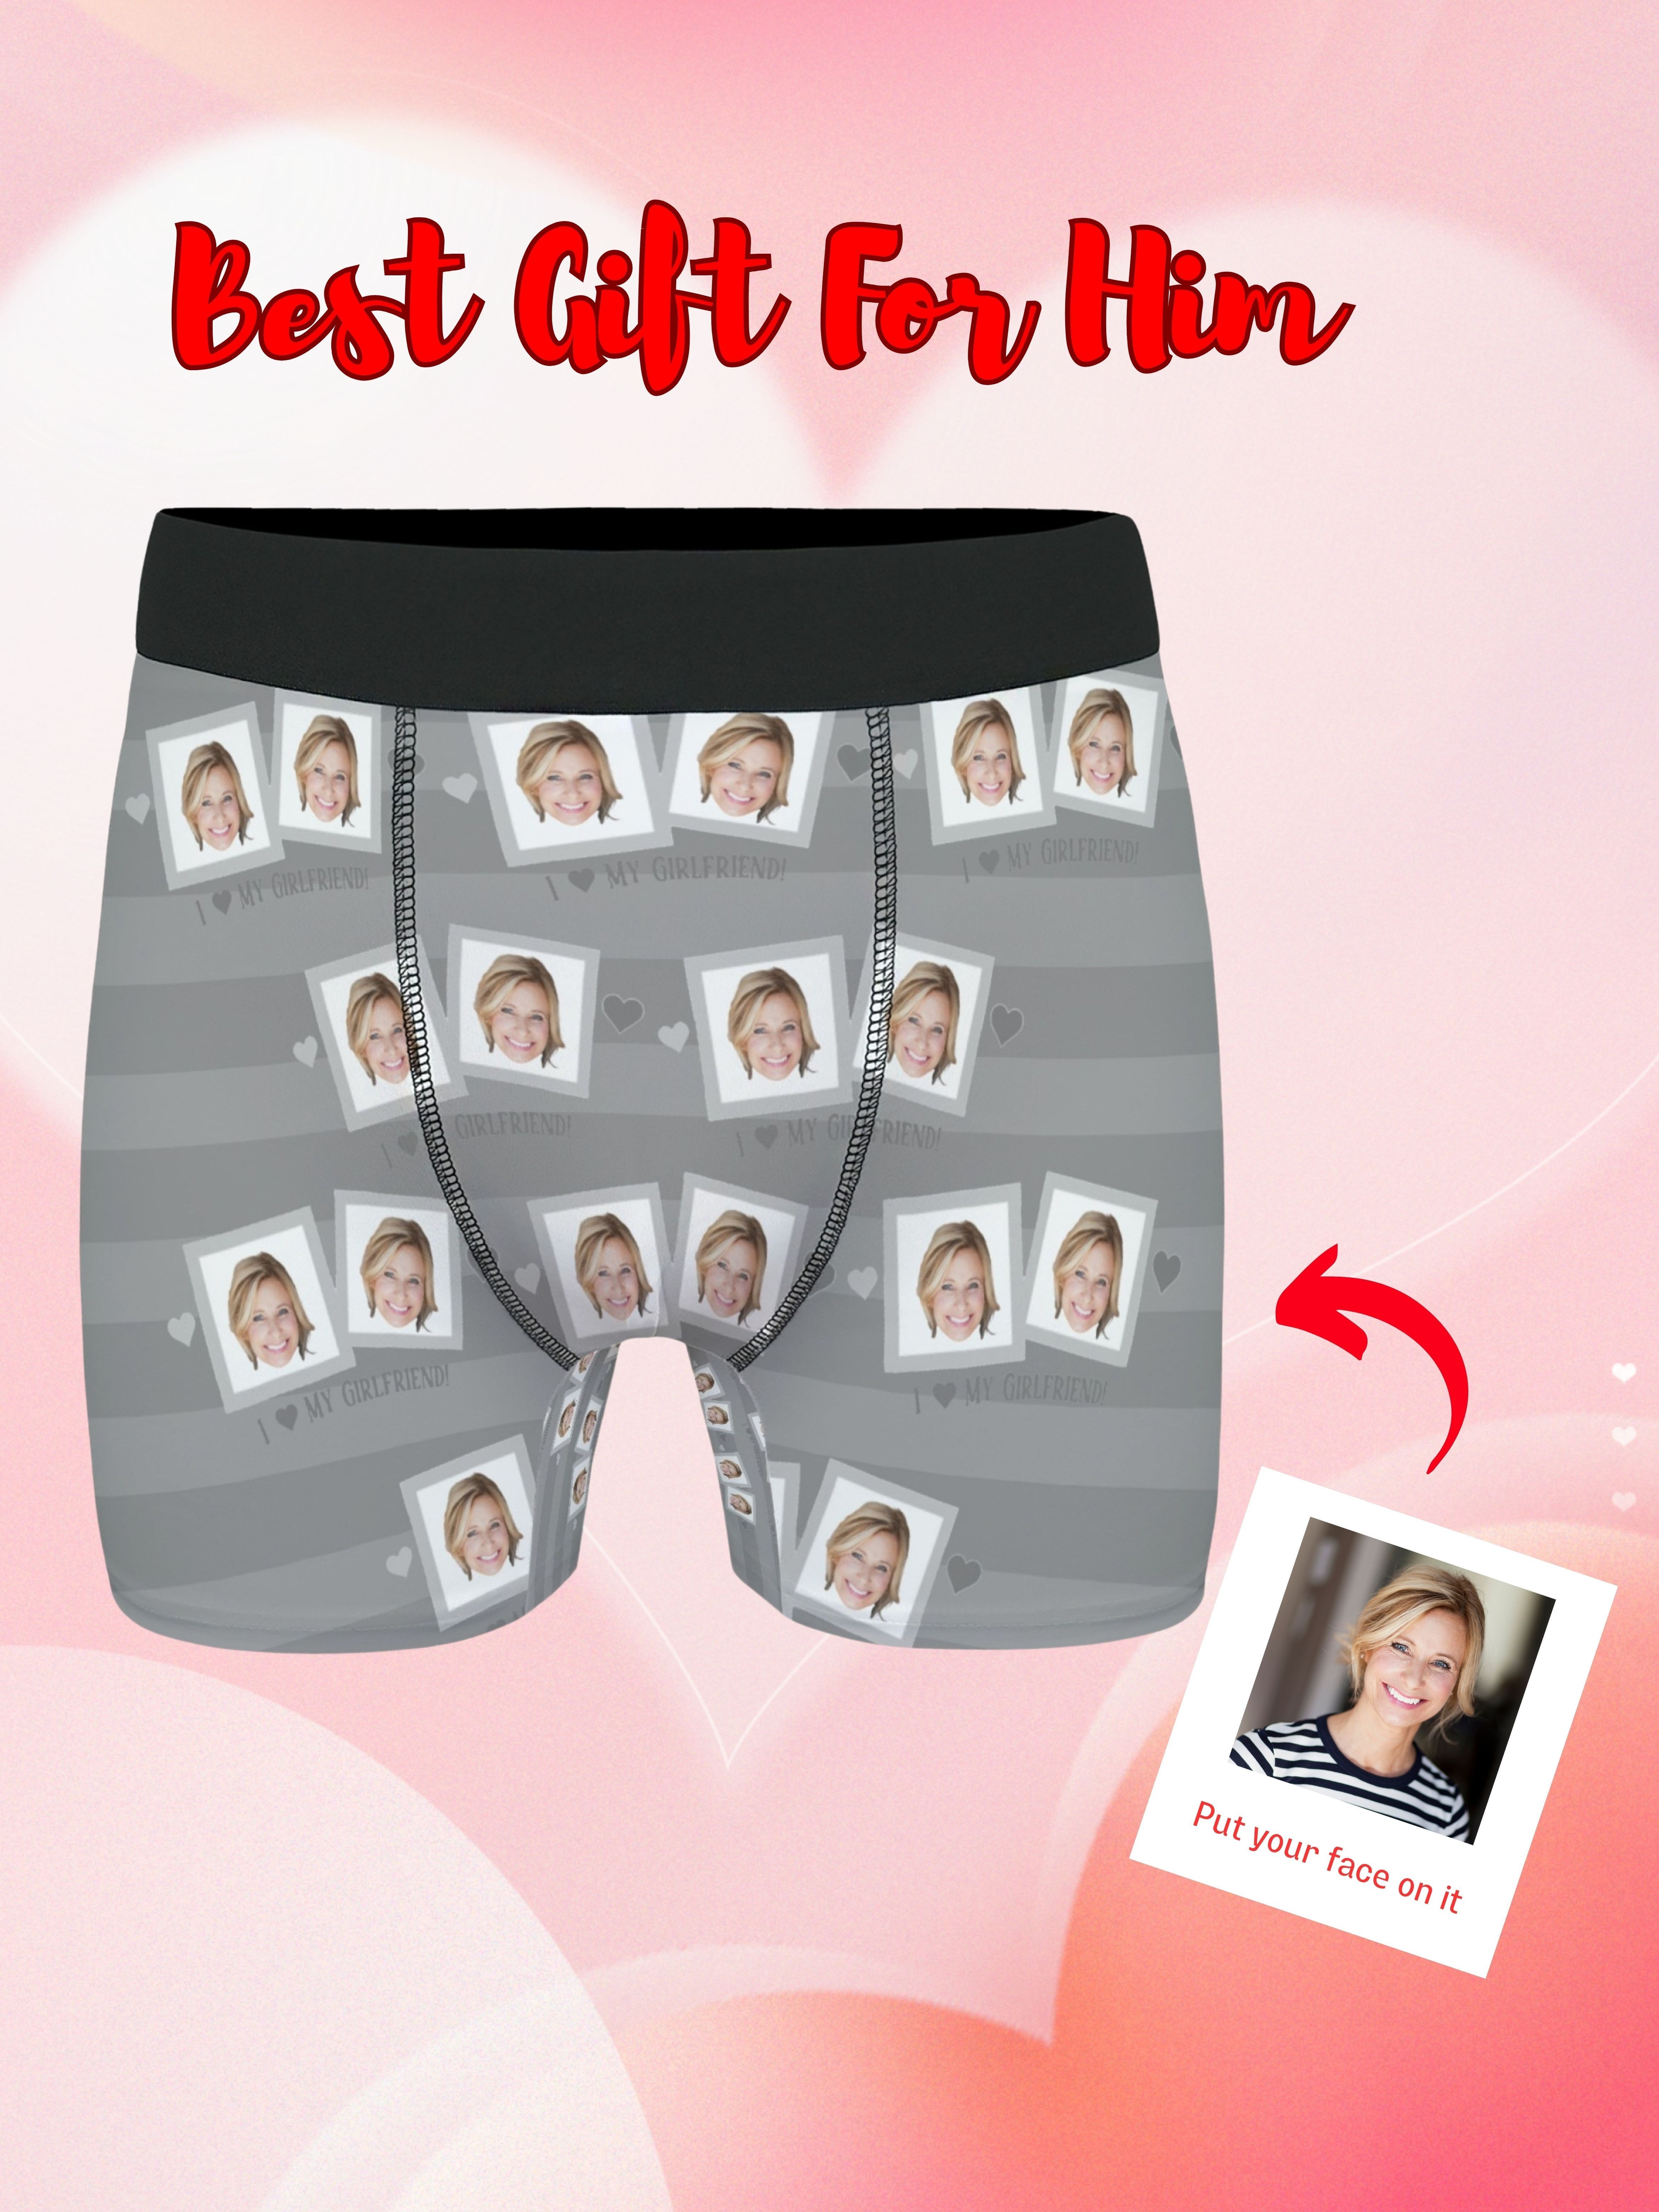 Custom Men's Boxer Briefs with Girlfriend Wife Face Photo Husband Christmas  Gift